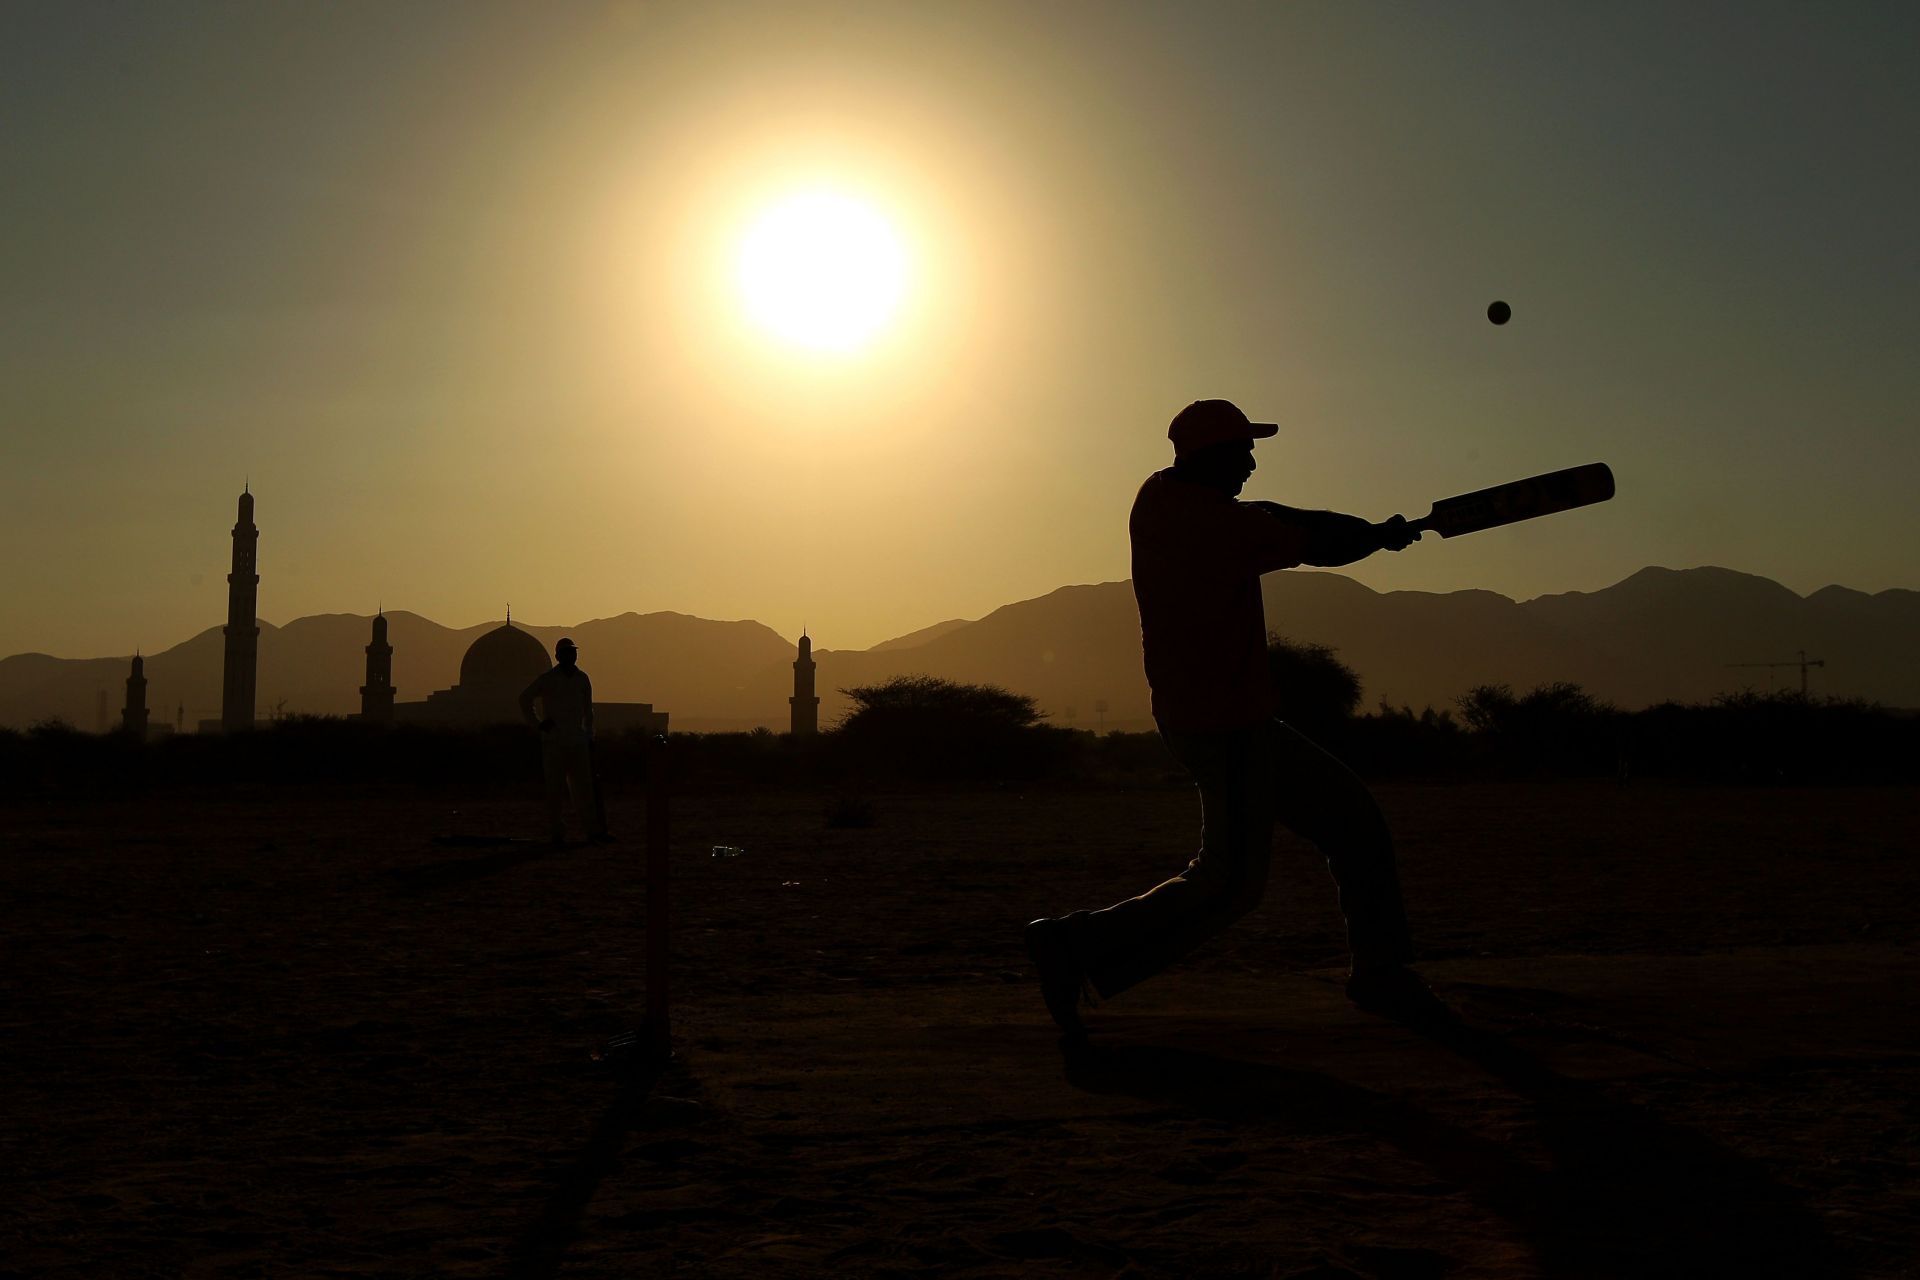 A snap from Local Cricket In Muscat, Oman